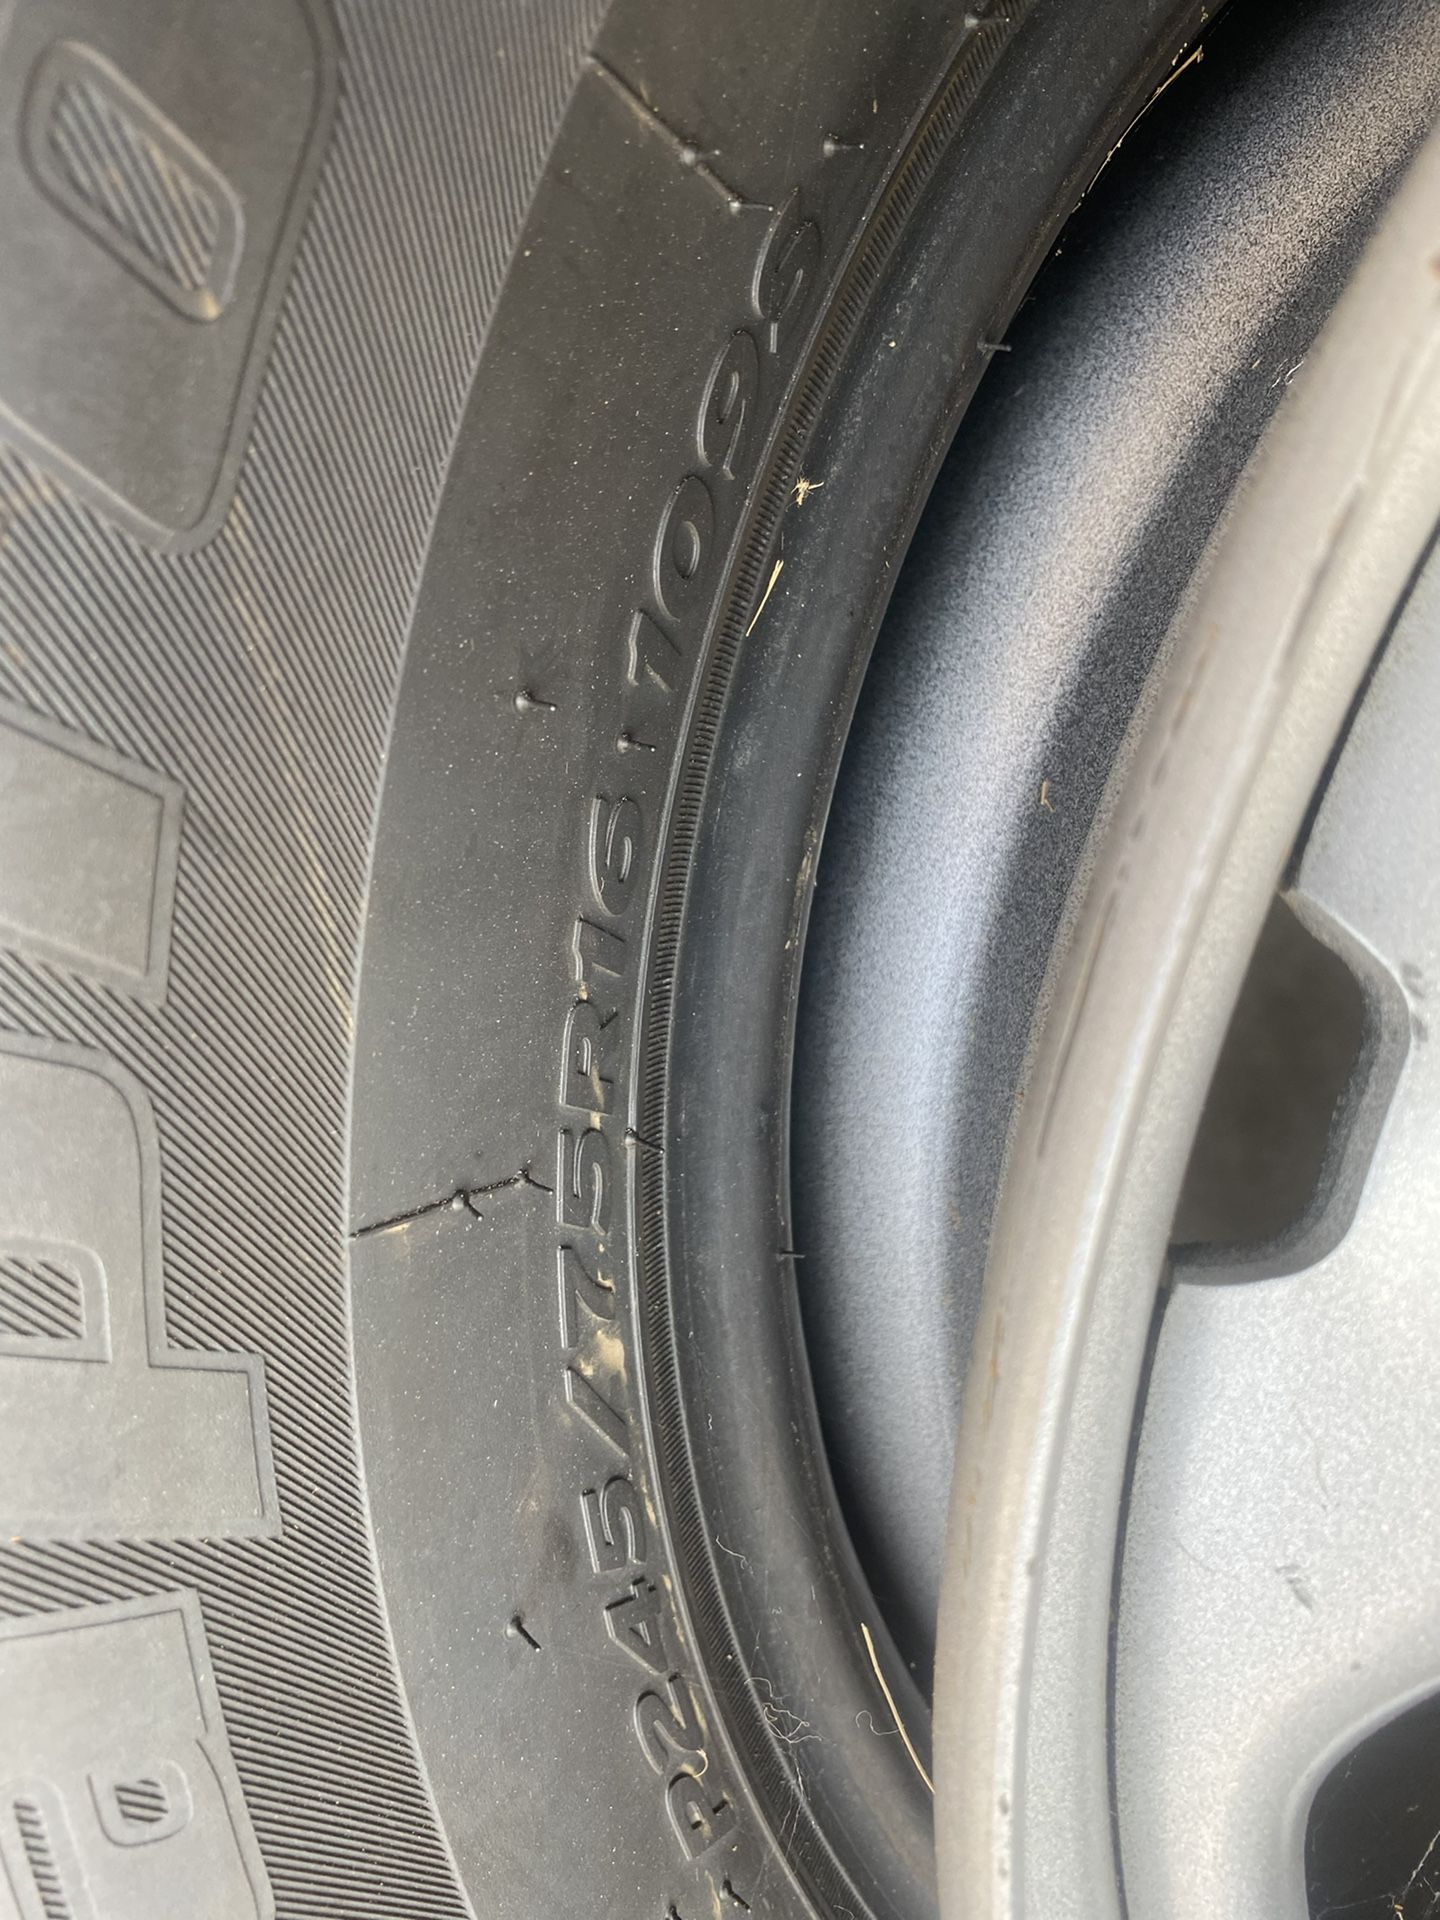 Hankook P245/75R16 109S Tires and Wheels 